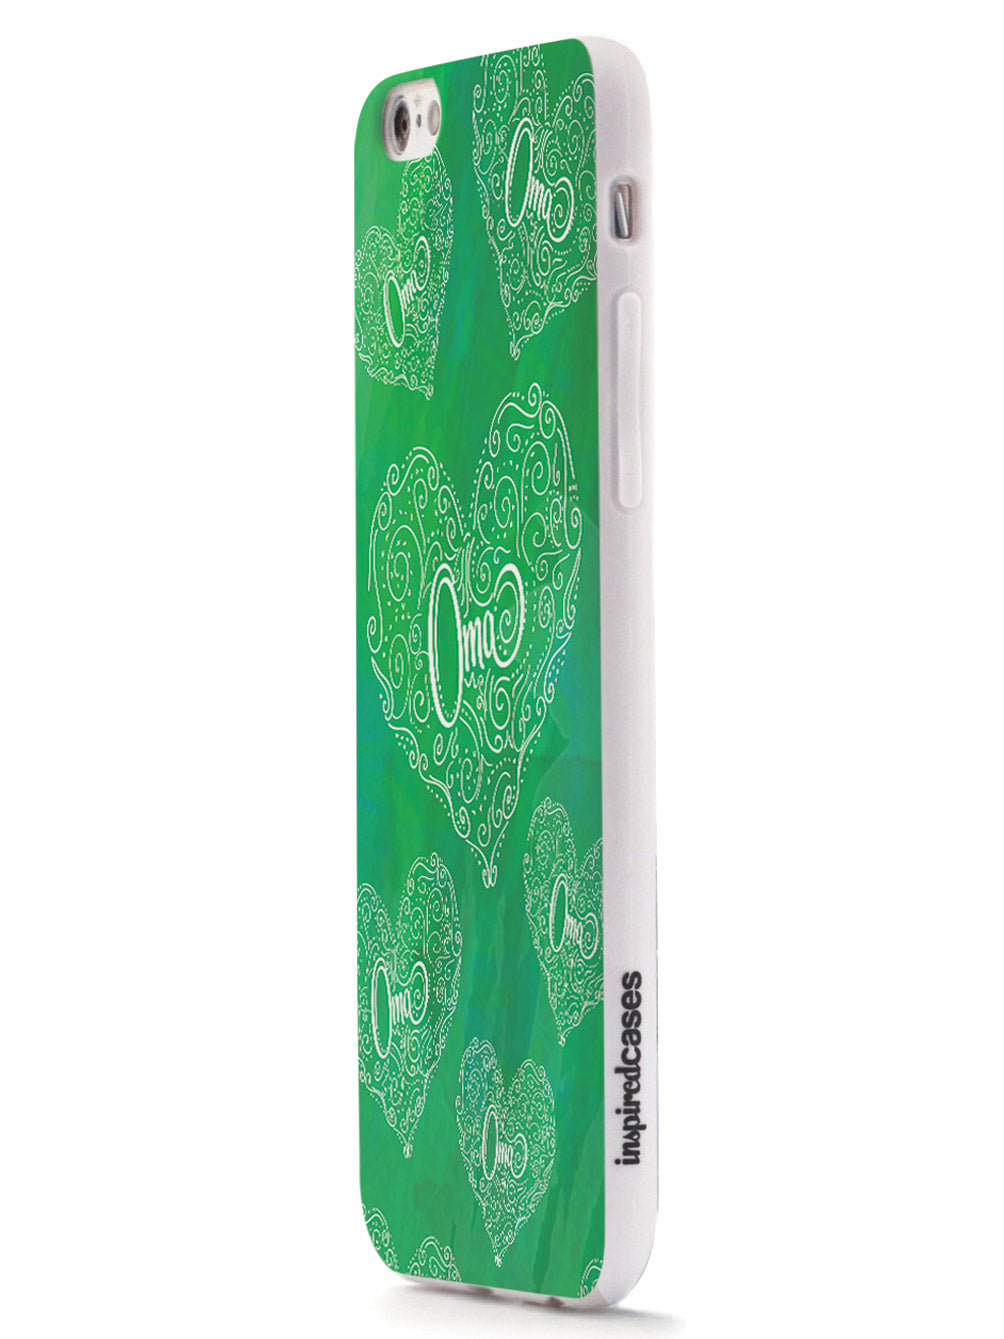 Oma Doodle Hearts - Green Case